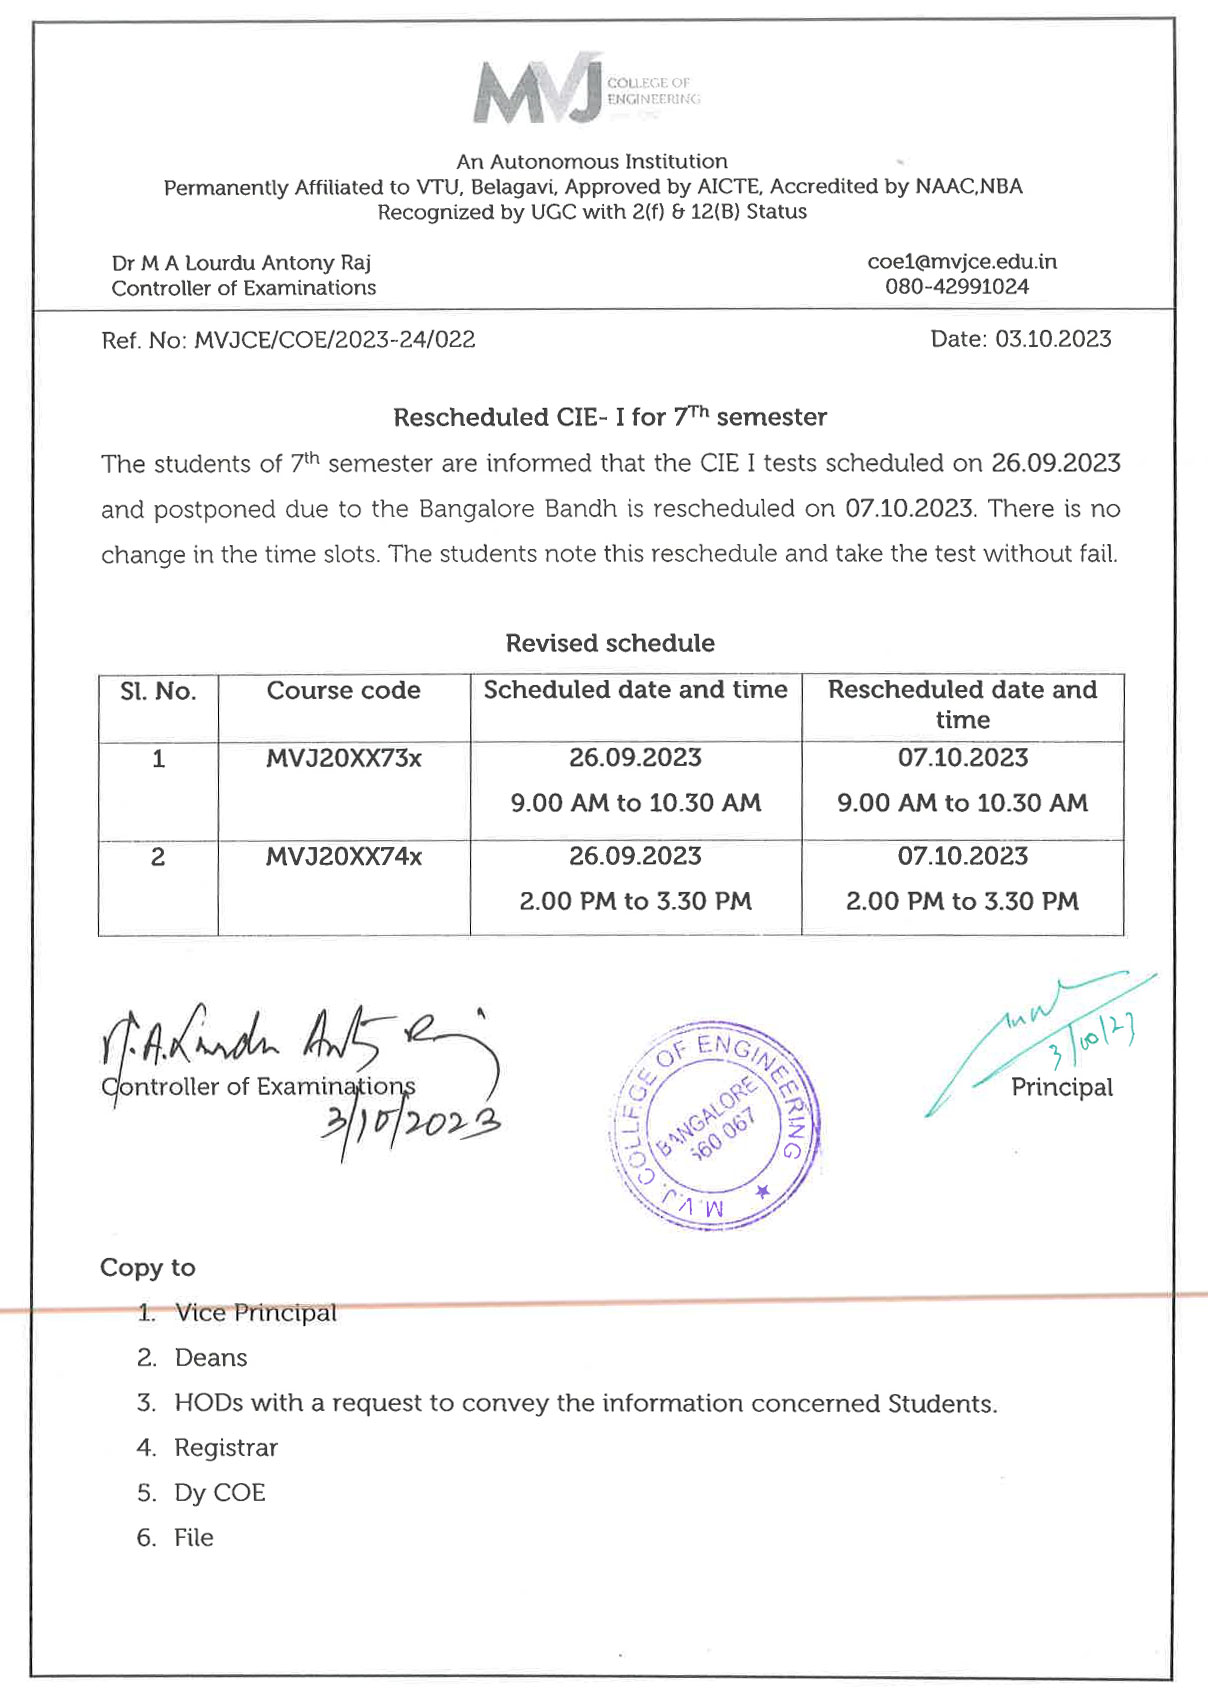 Rescheduled CIE-1 for 7th Semester